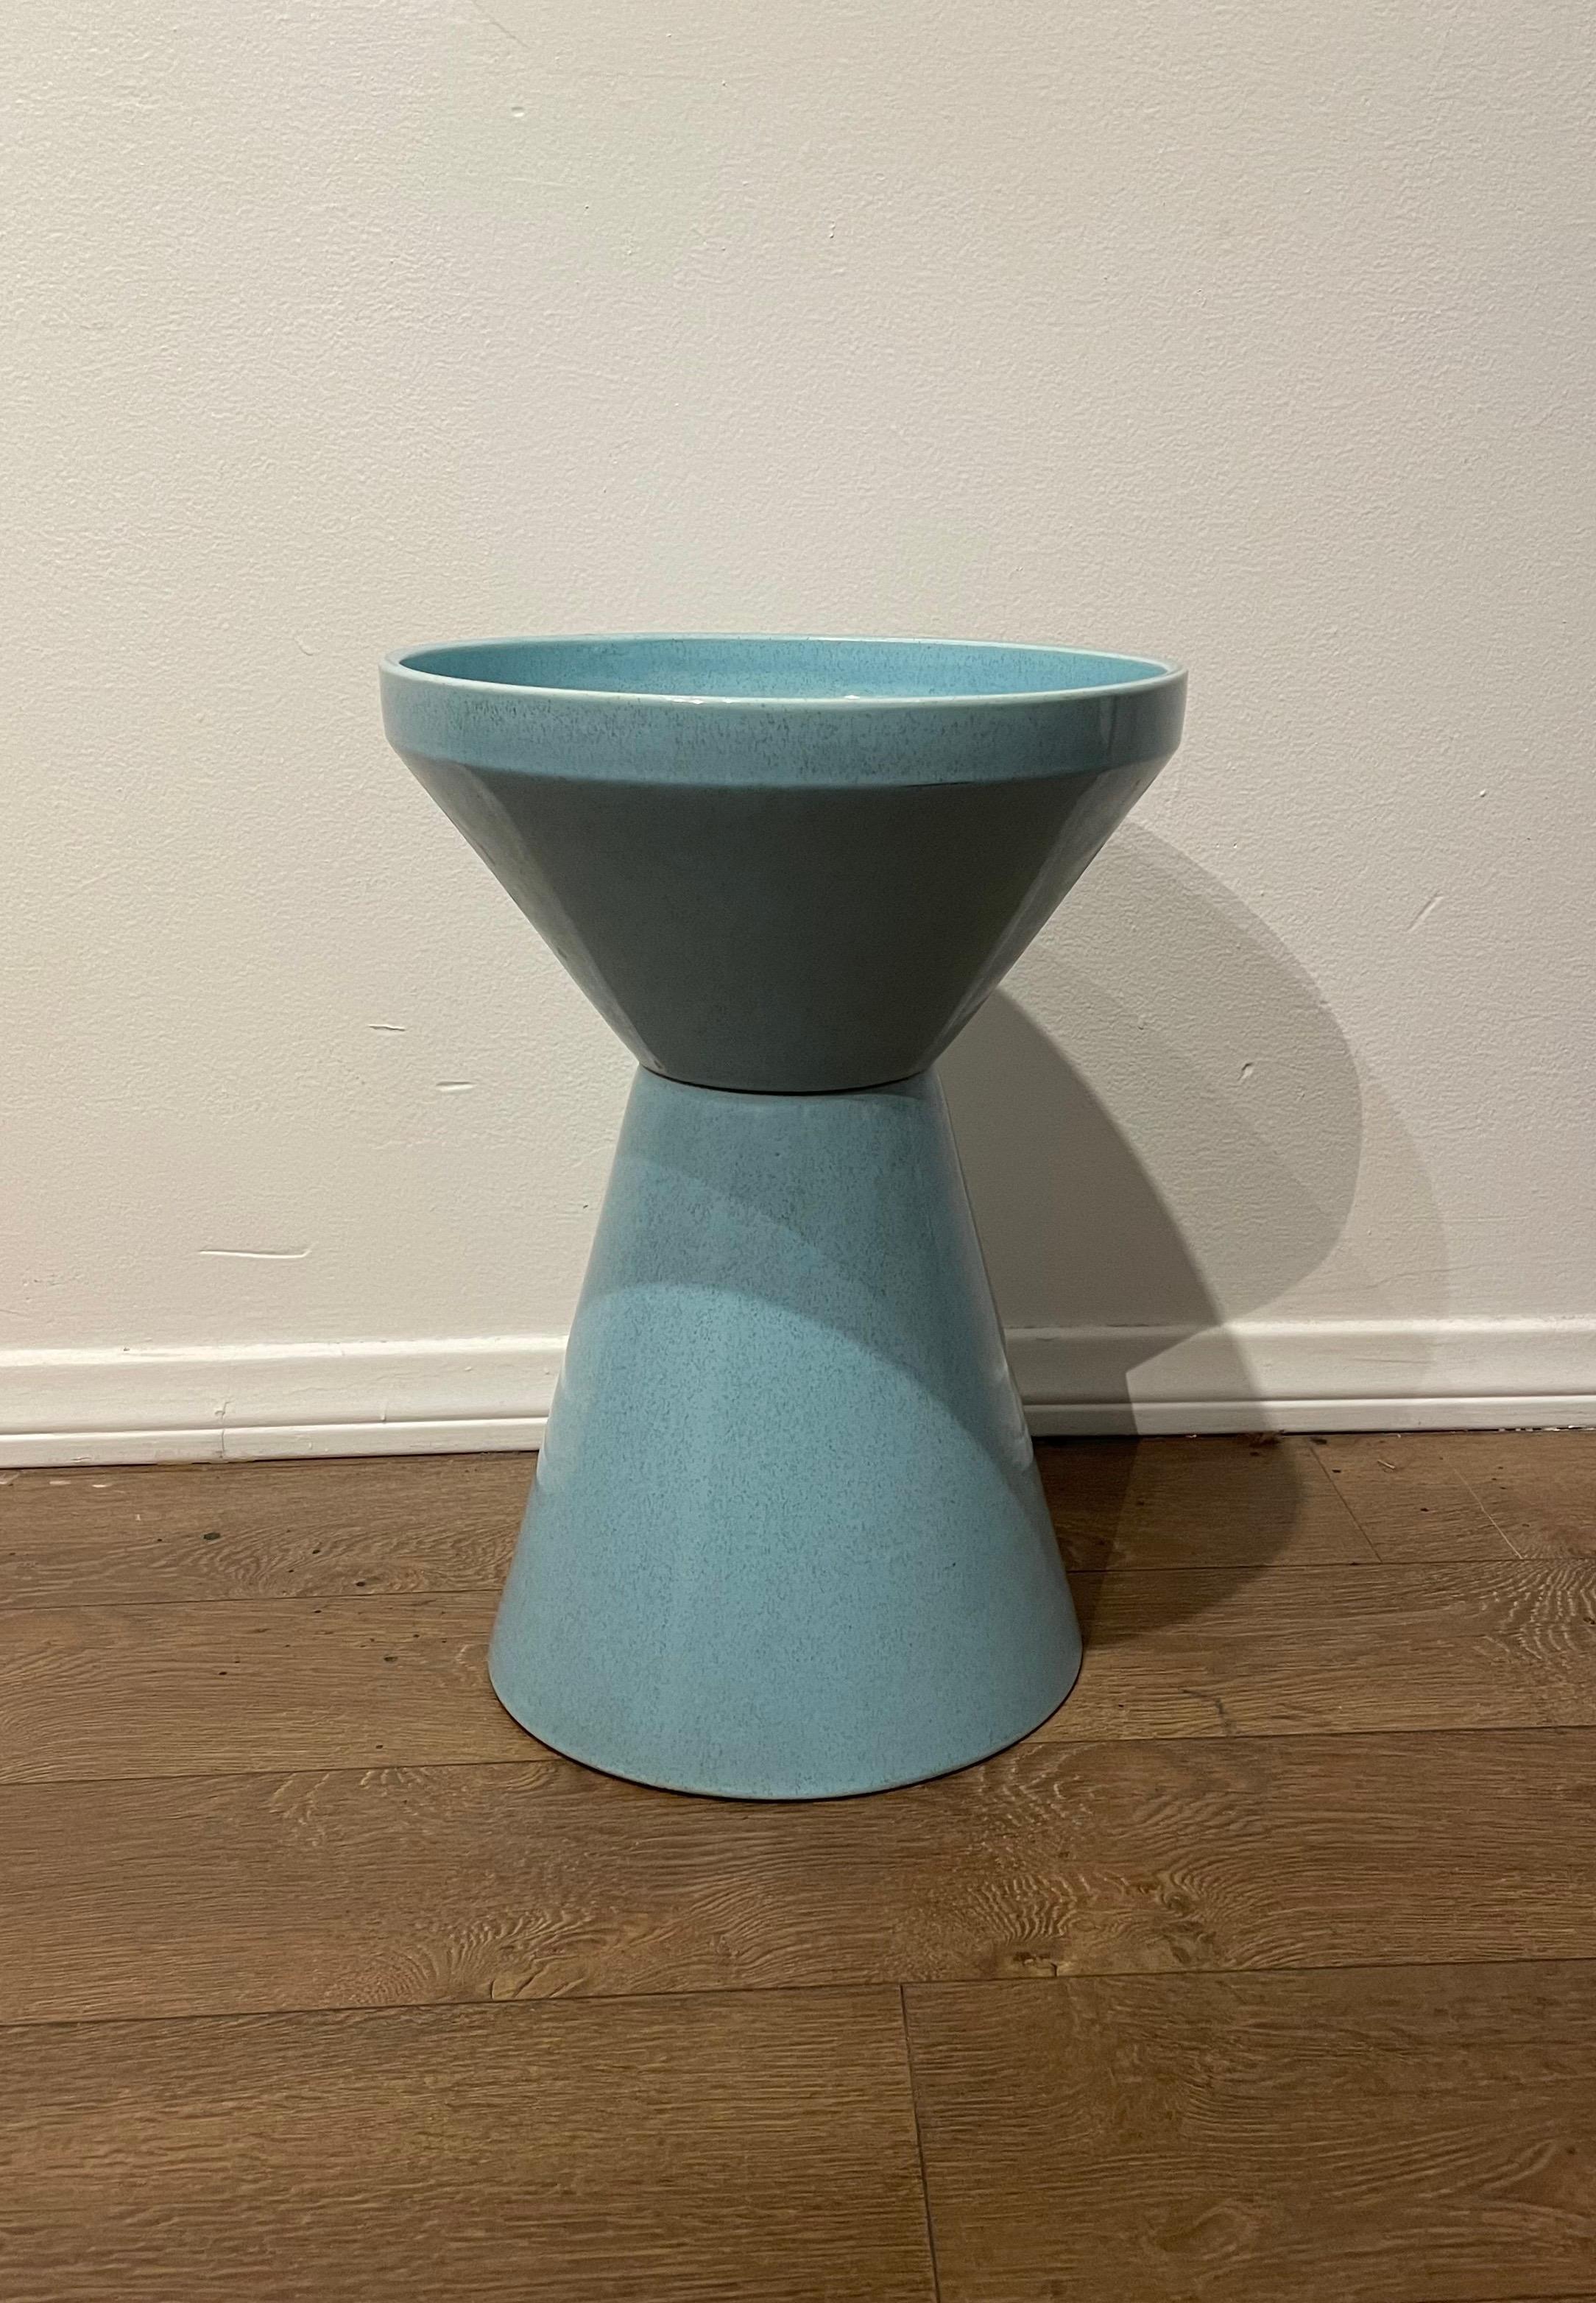 An incredibly rare piece by Bauer pottery circa 1950's , classic baby blue finish with Spreckels nice glaze color and a very rare piece great condition. no chips or cracks.With a mouth opening diameter of 13.5